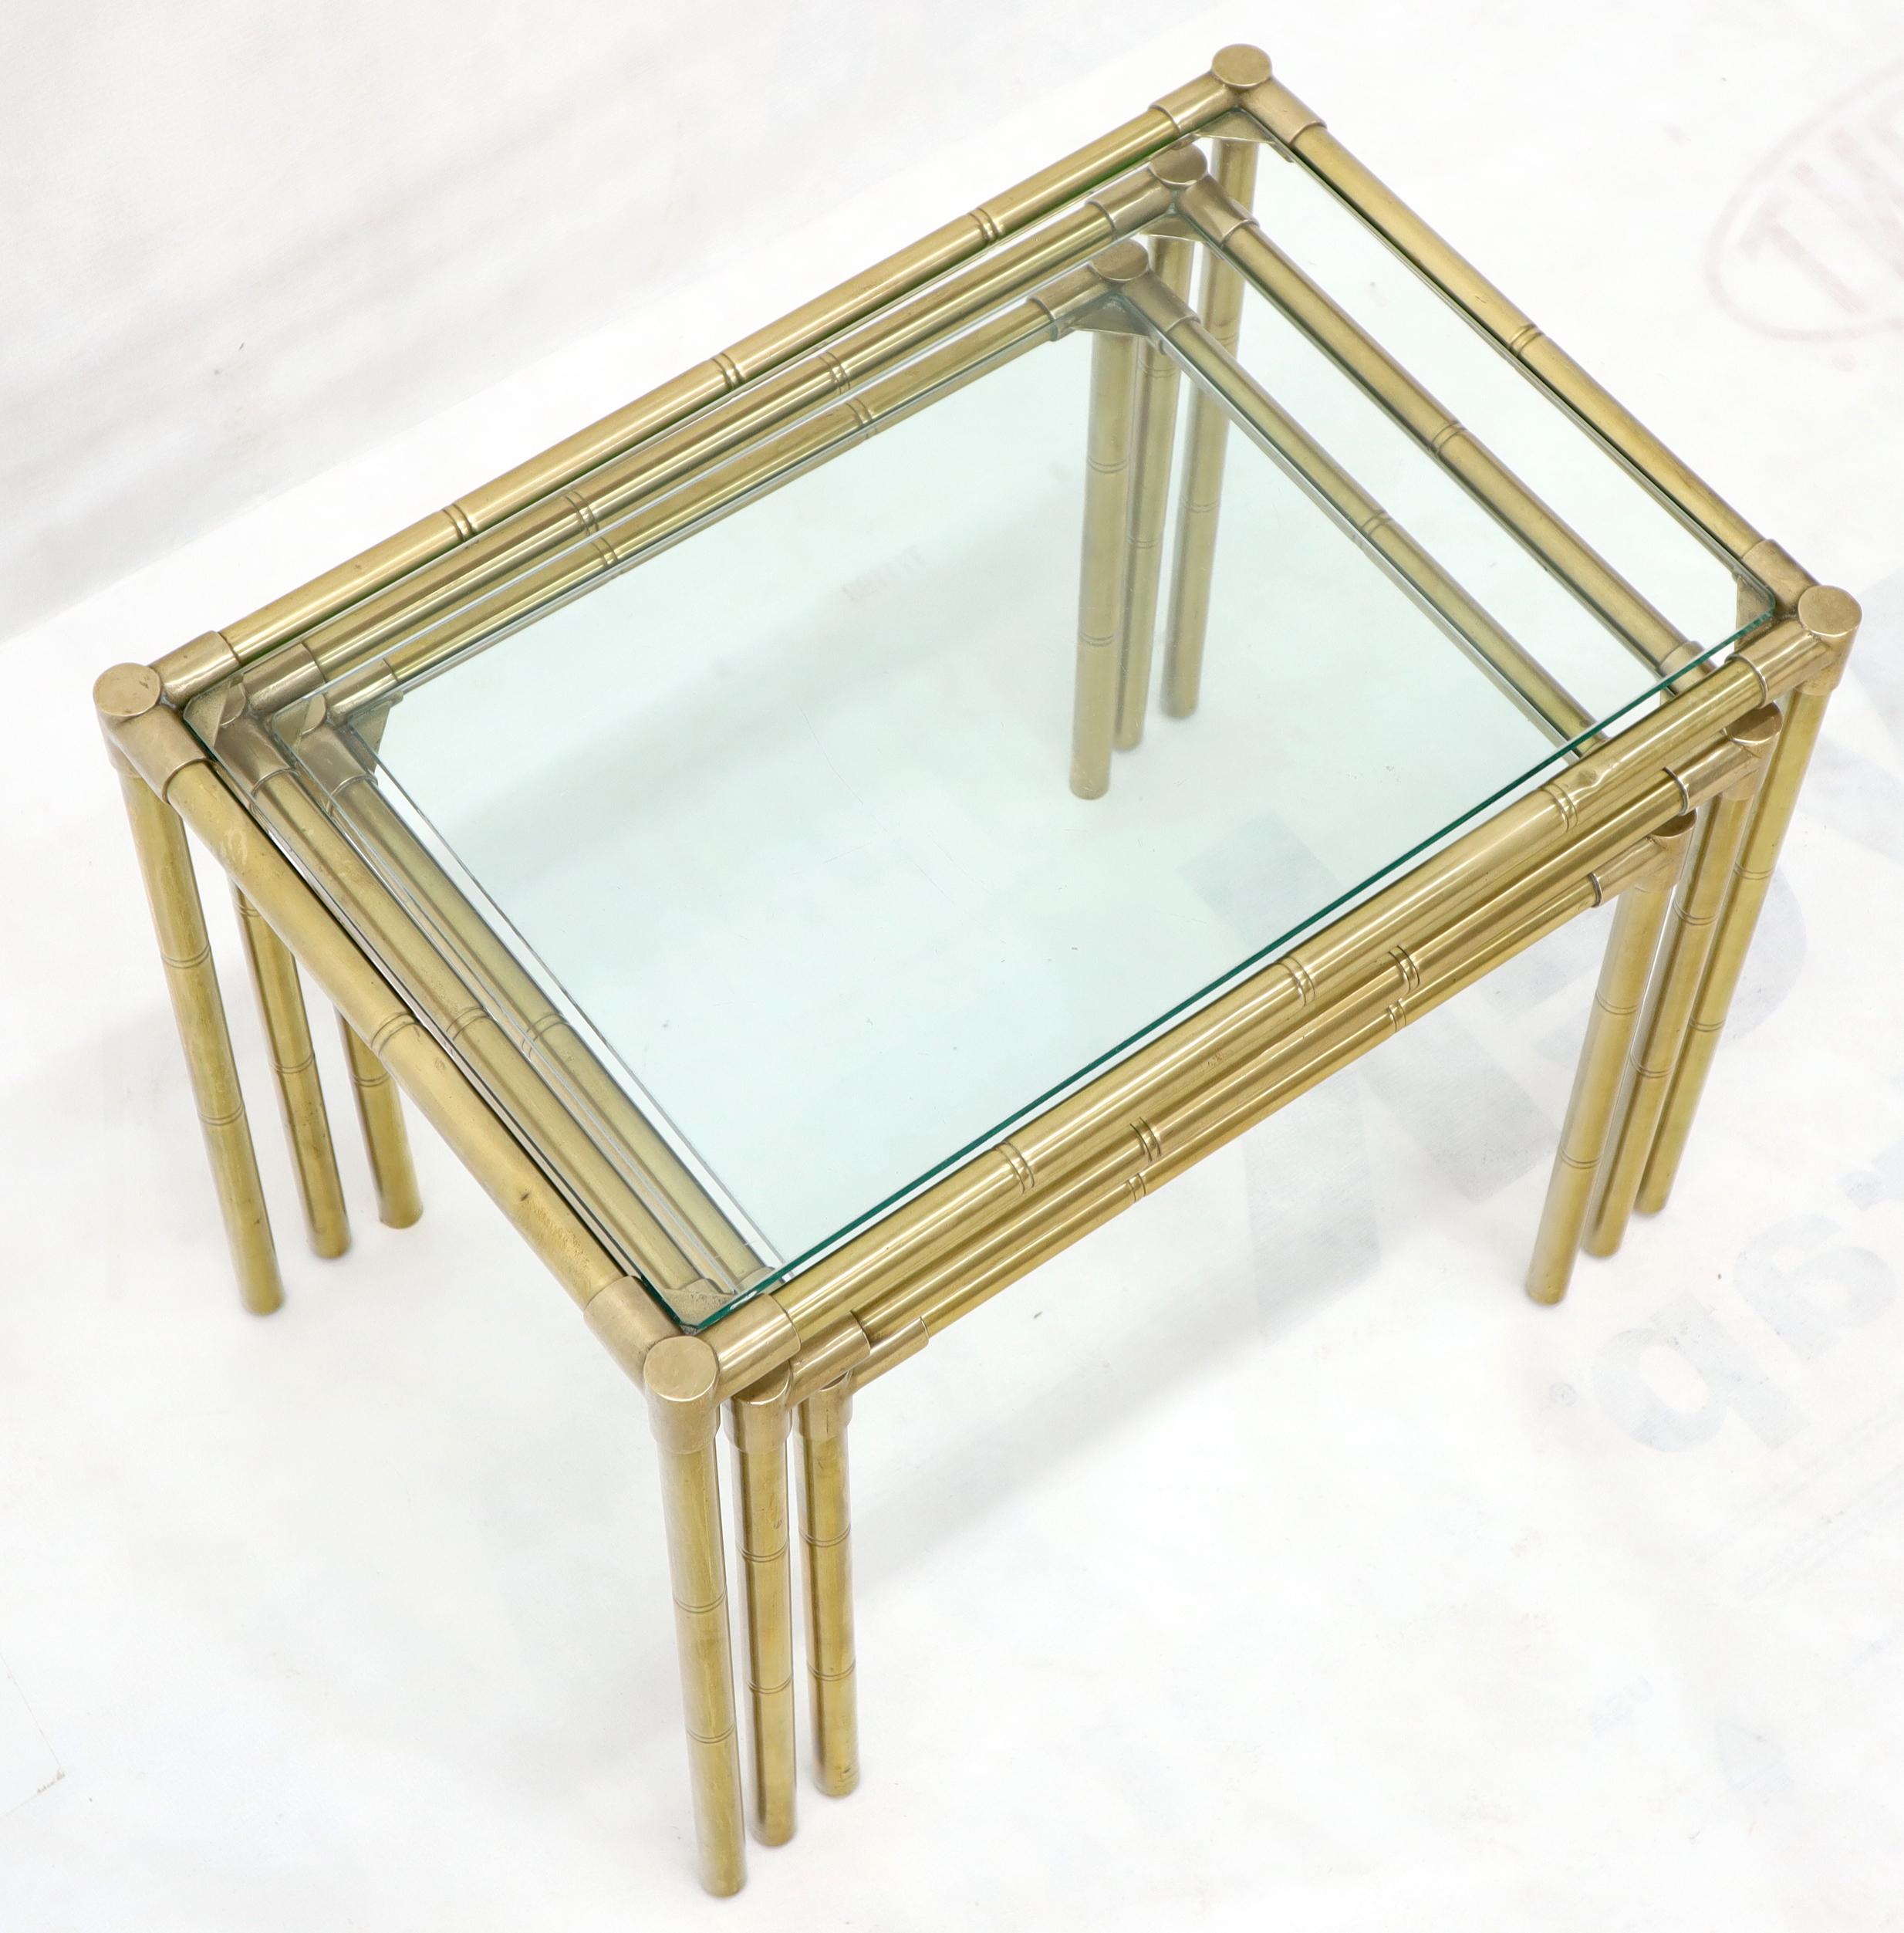 Polished Quality Solid Brass Faux Bamboo Italian Mid Modern Nesting Tables For Sale